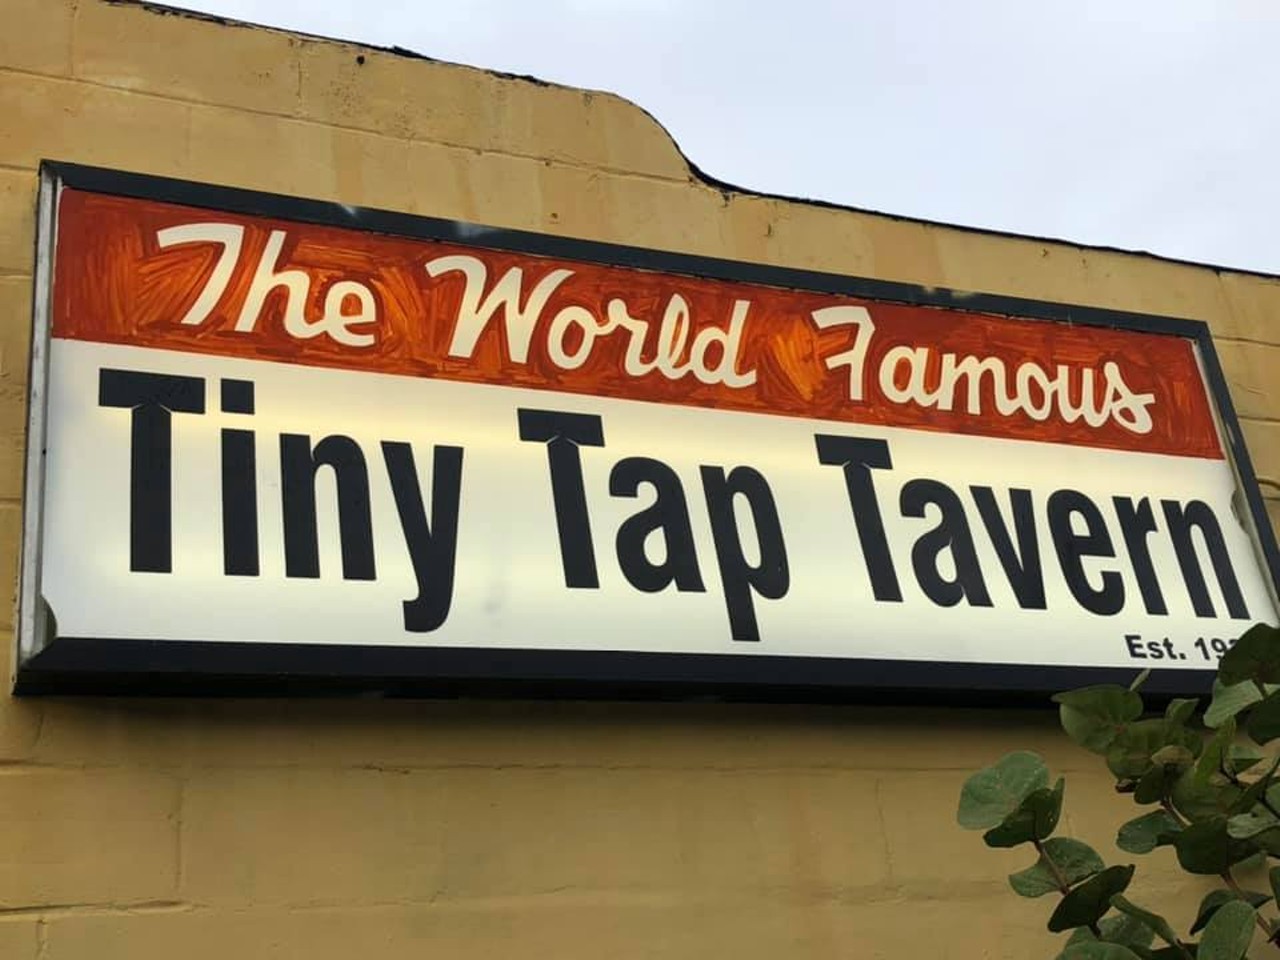 Tiny Tap Tavern 
2105 W Morrison Ave., Tampa, 813-254-3872
The Tiny Tap really cleaned up its act during the pandemic, including making the move to non-smoking indoors and giving every surface a good wipe down. The charm of a dimly lit bar with one of the few remaining Megatouches (IYKYK) is all still there, and now you can even pay with a credit card. Regulars here usually move between a barstool and the pool or foosball tables and are sure to regale you with tales of the old Tampa. 
Photo via Tiny Tap Tavern/Facebook